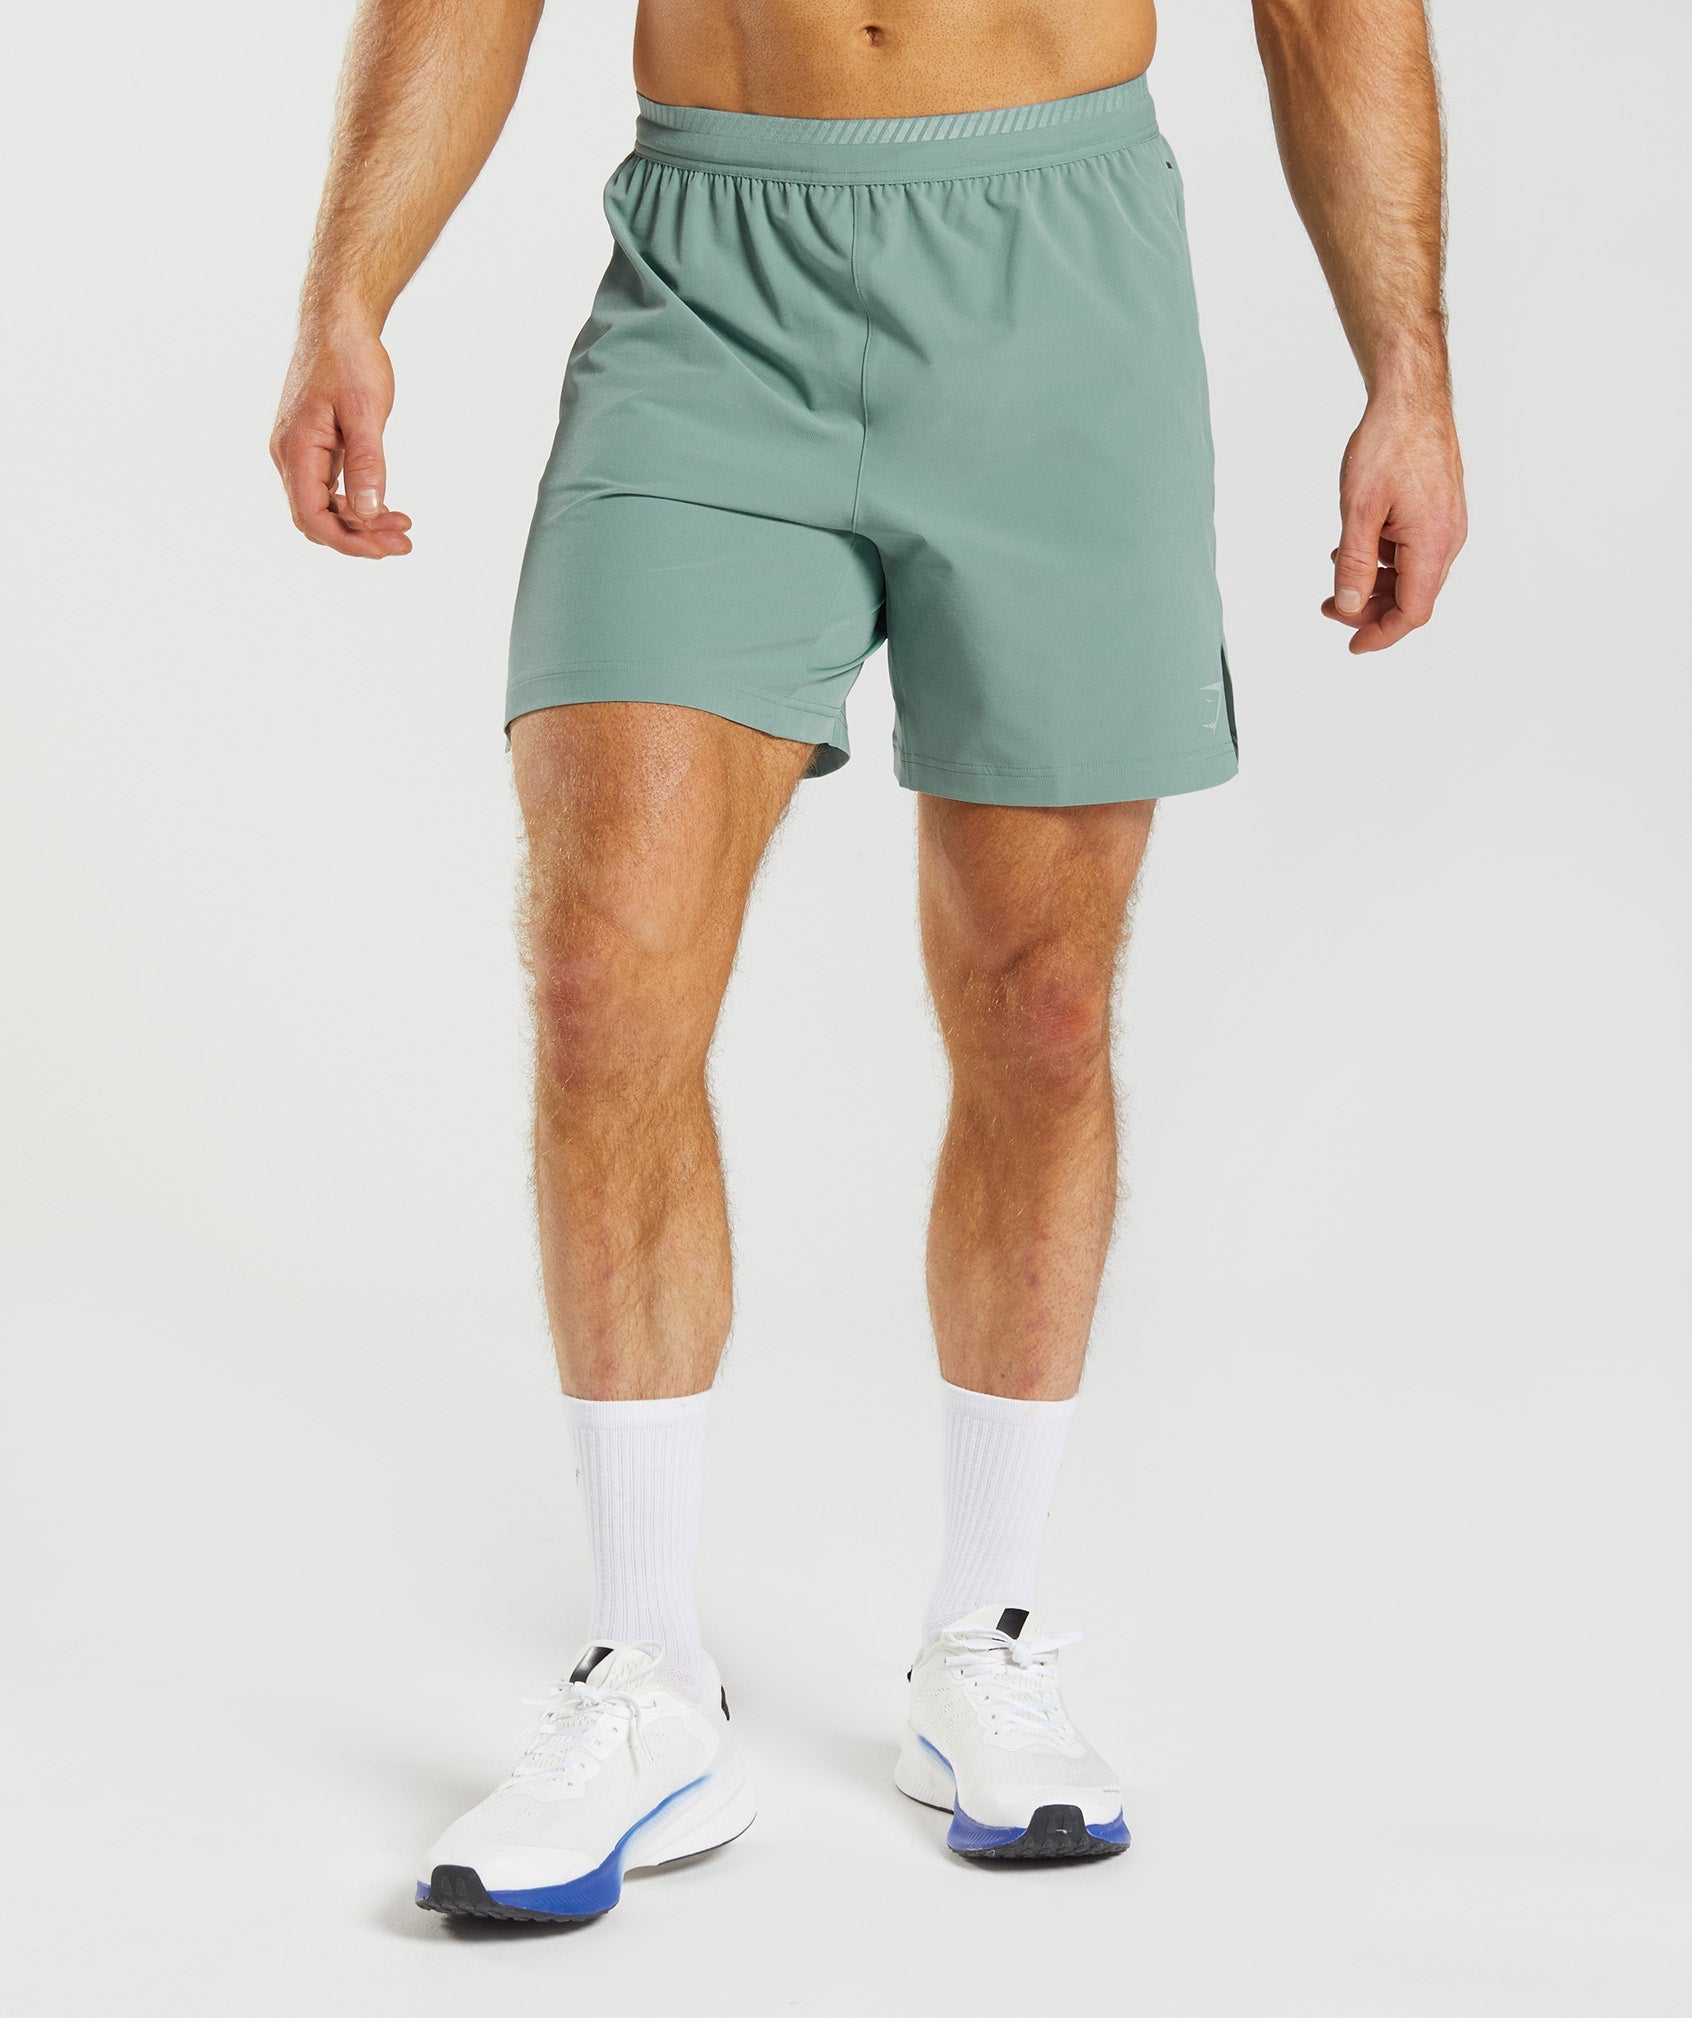 Apex 7" Hybrid Shorts in Ink Teal - view 1